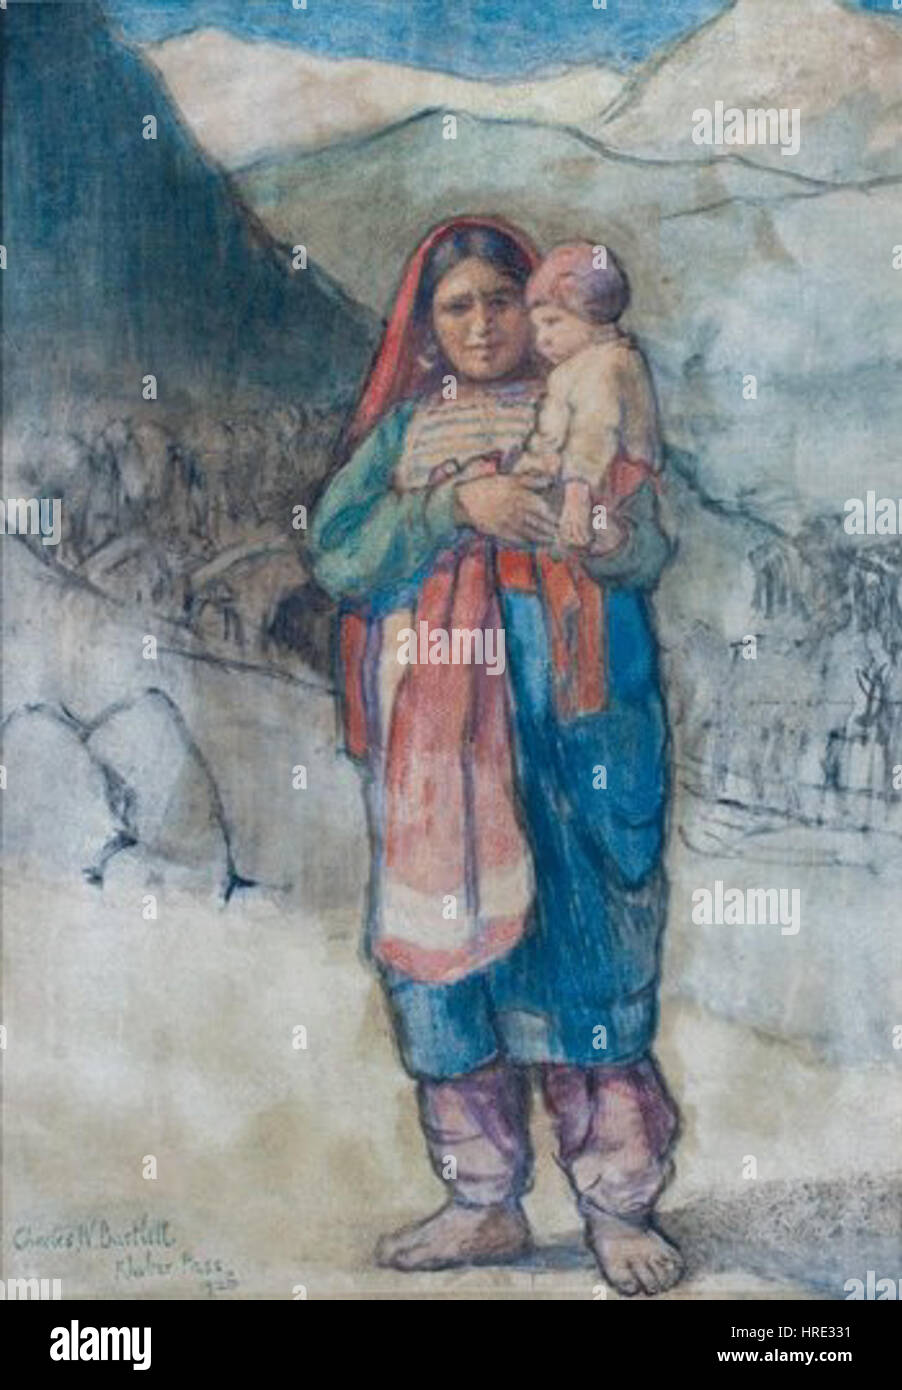 'Afghani Mother & Child, Kyber Pass, 1920, Bartlett Stock Photo